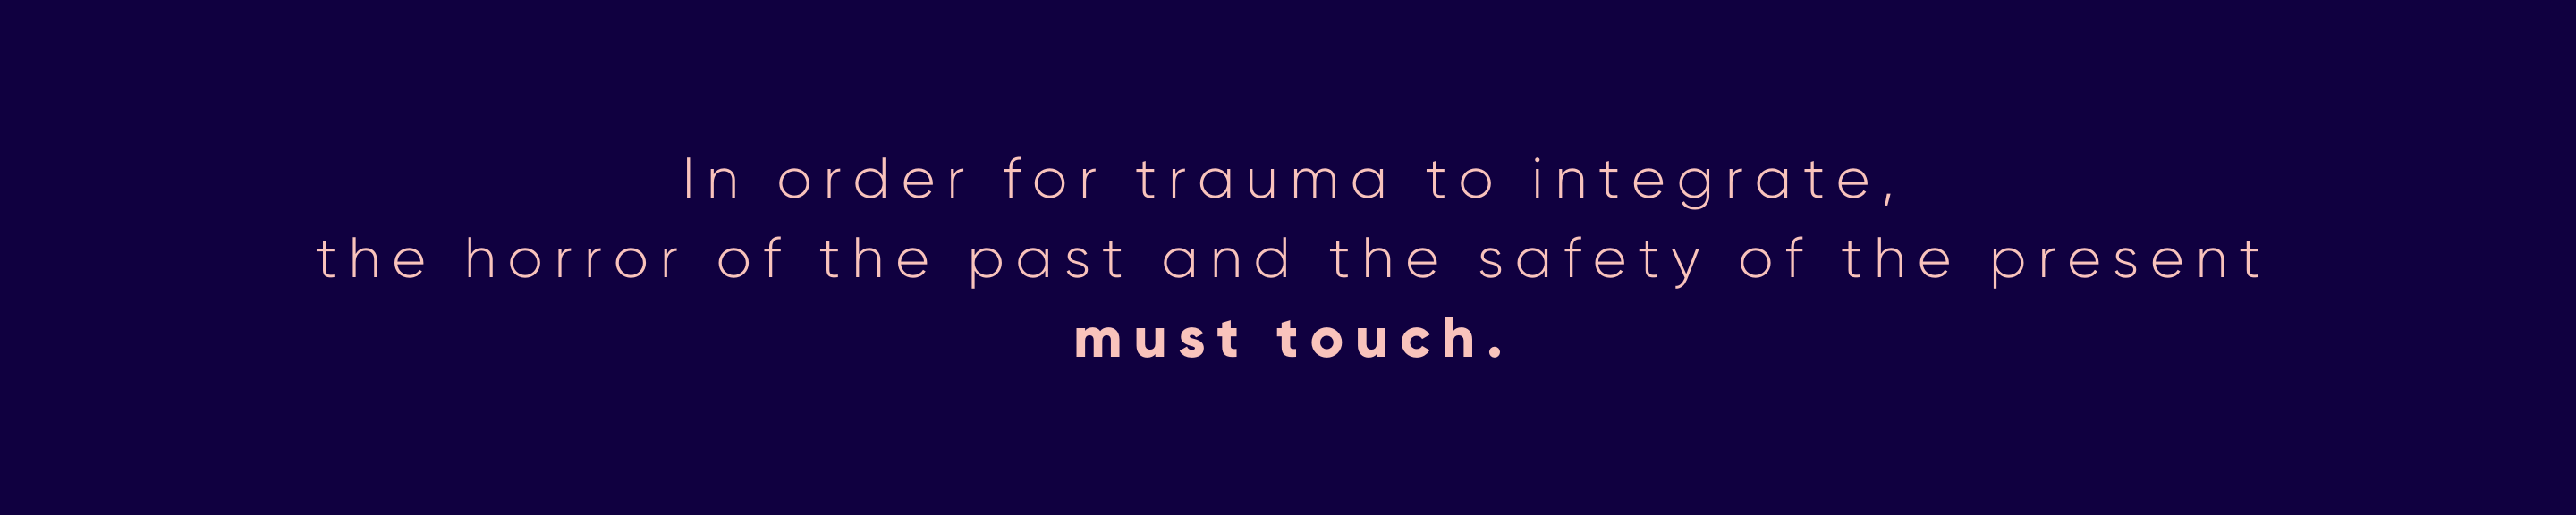 In Order For Trauma To Integrate, The Horror Of The Past And The Safety Of The Present Must Touch.